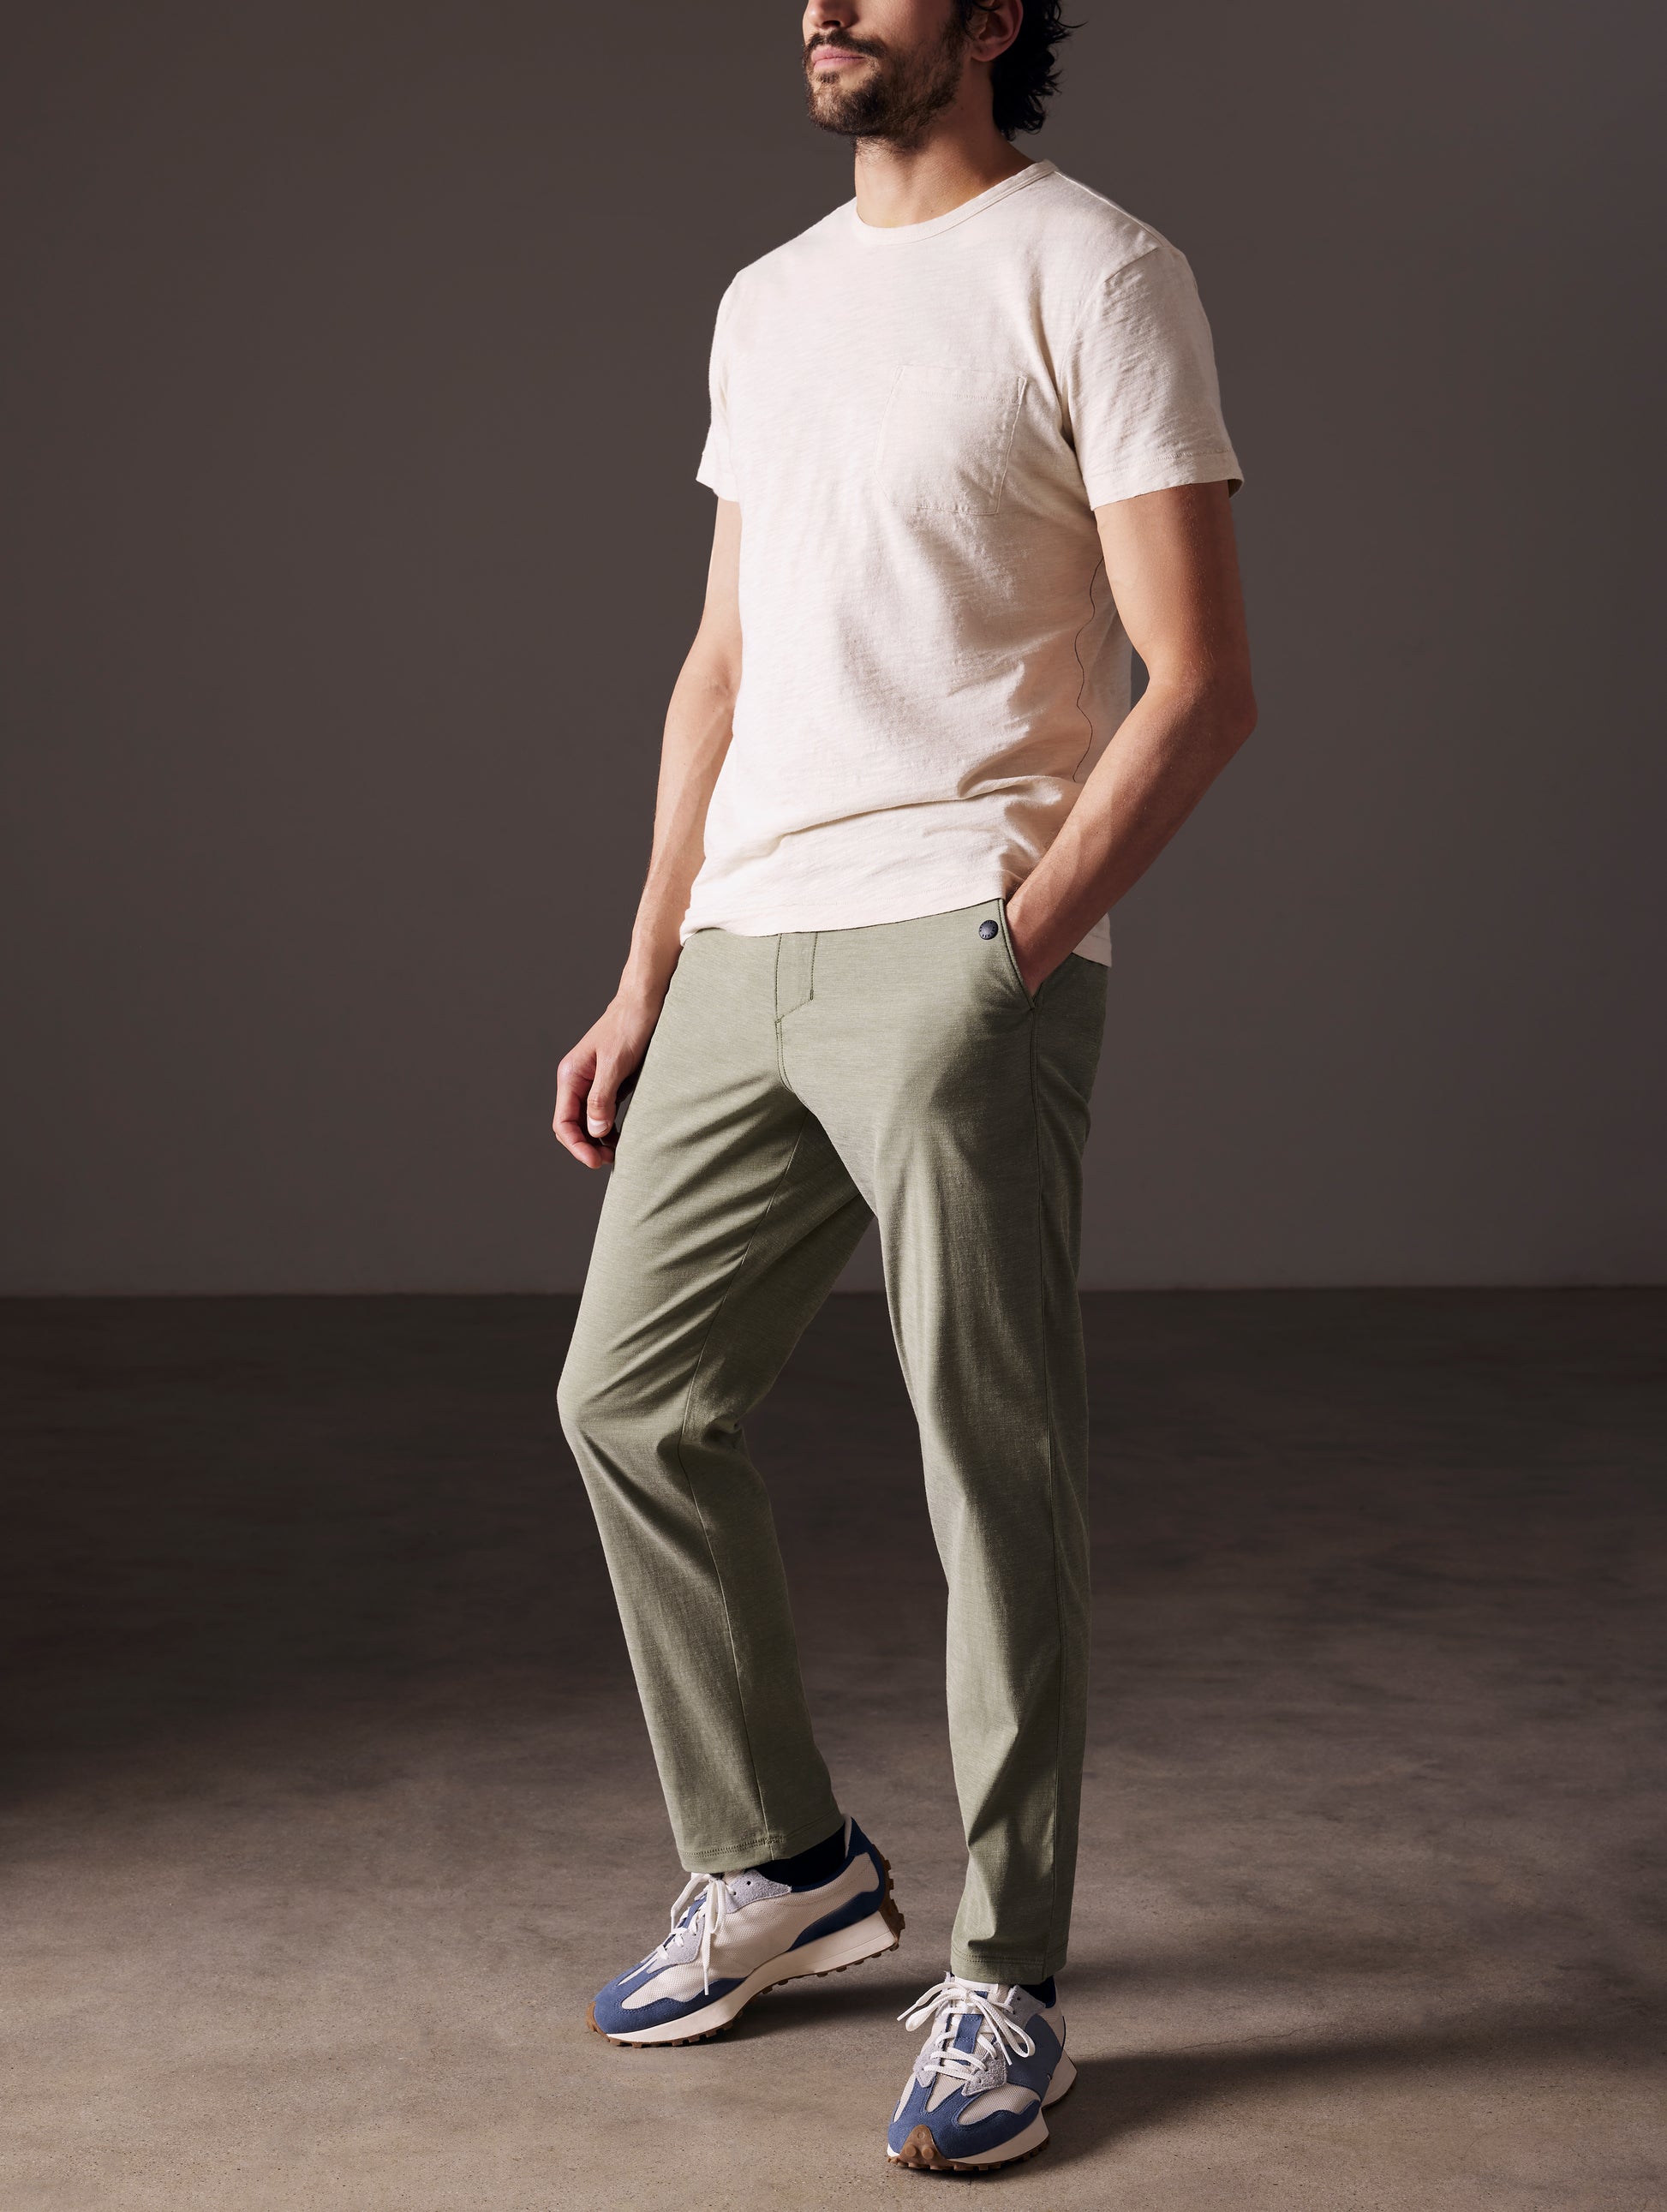 man wearing green pants from AETHER Apparel